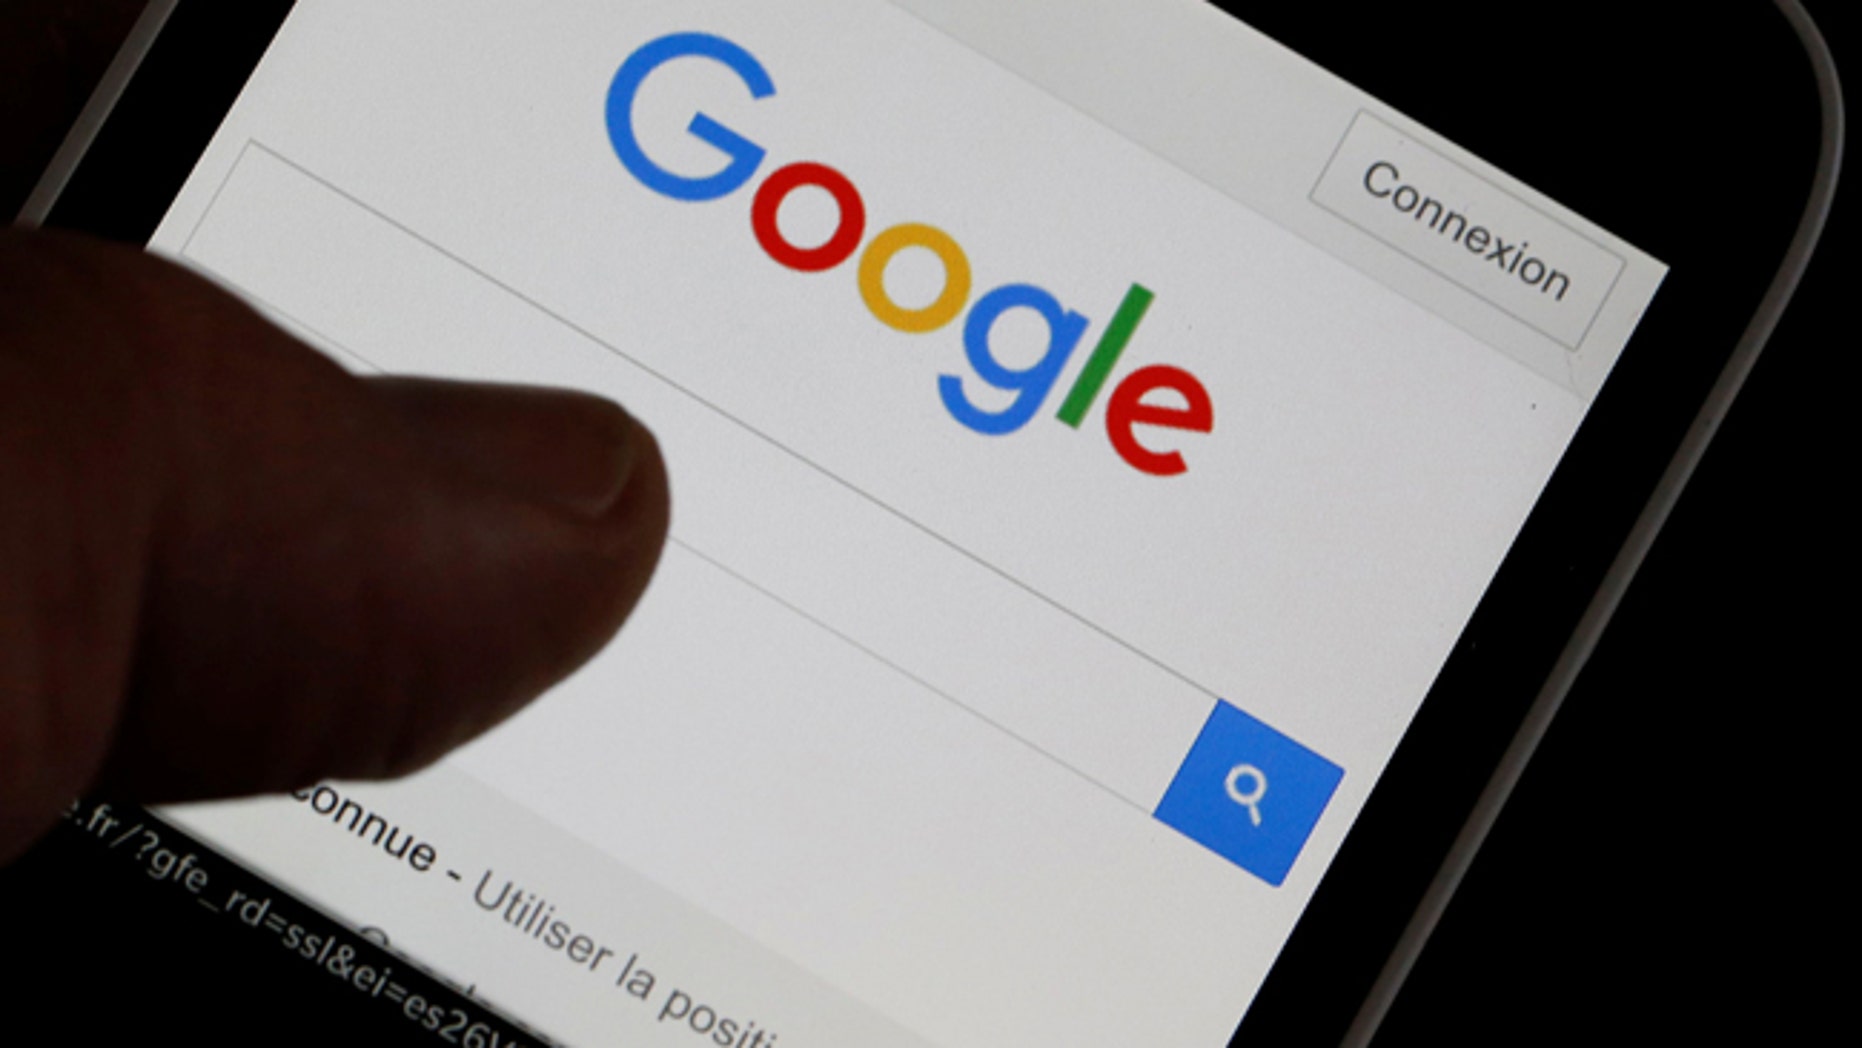 7 ways to search without using Google